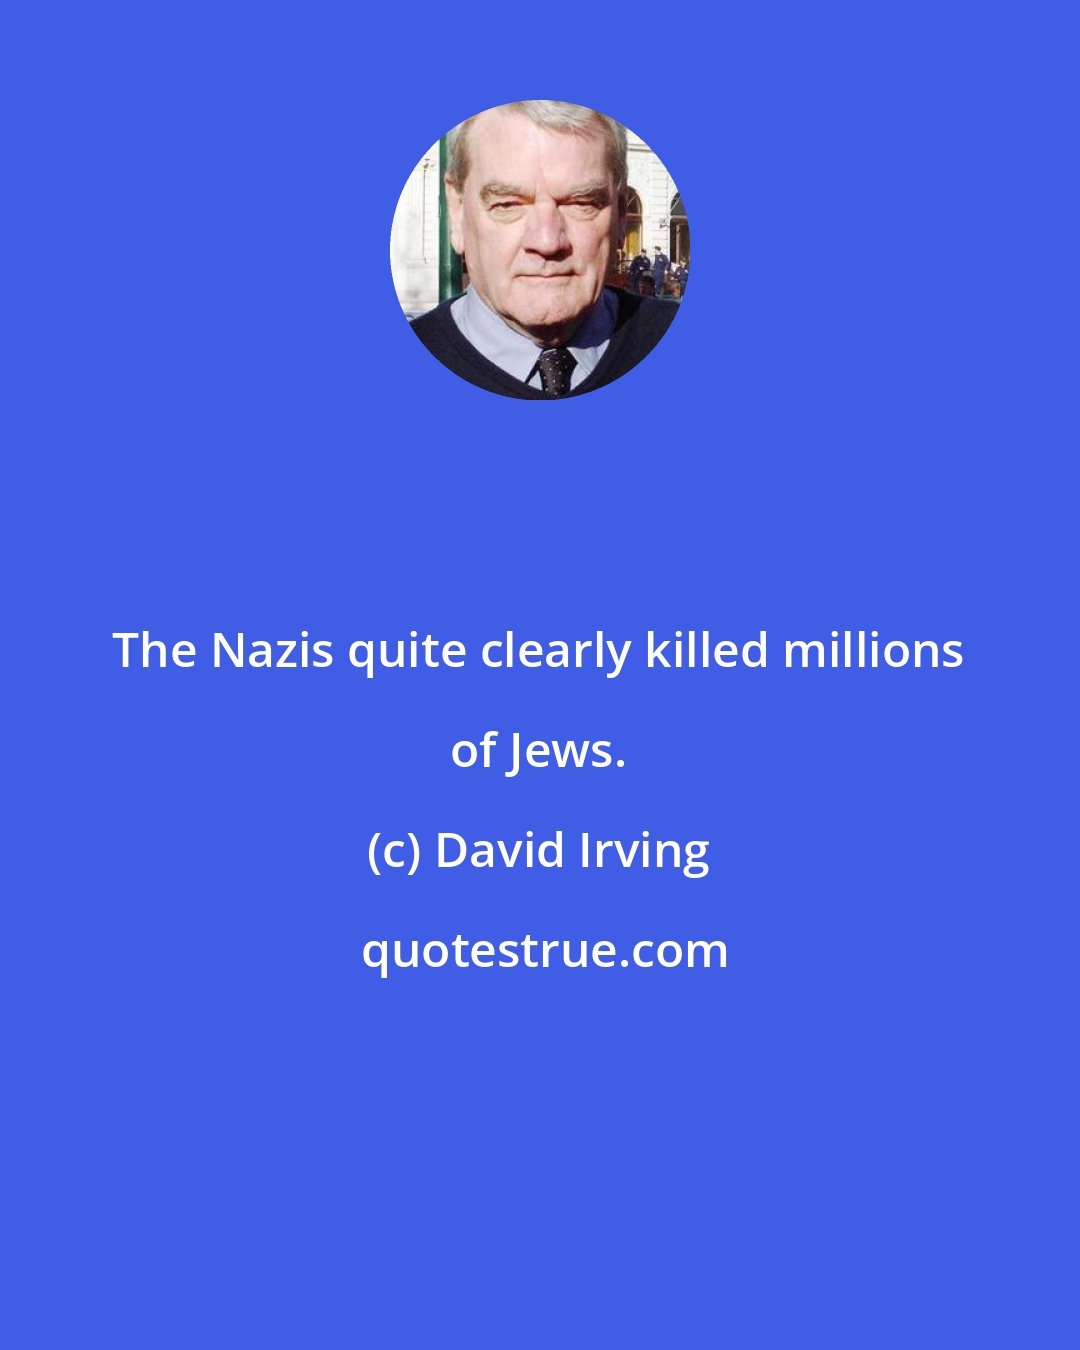 David Irving: The Nazis quite clearly killed millions of Jews.